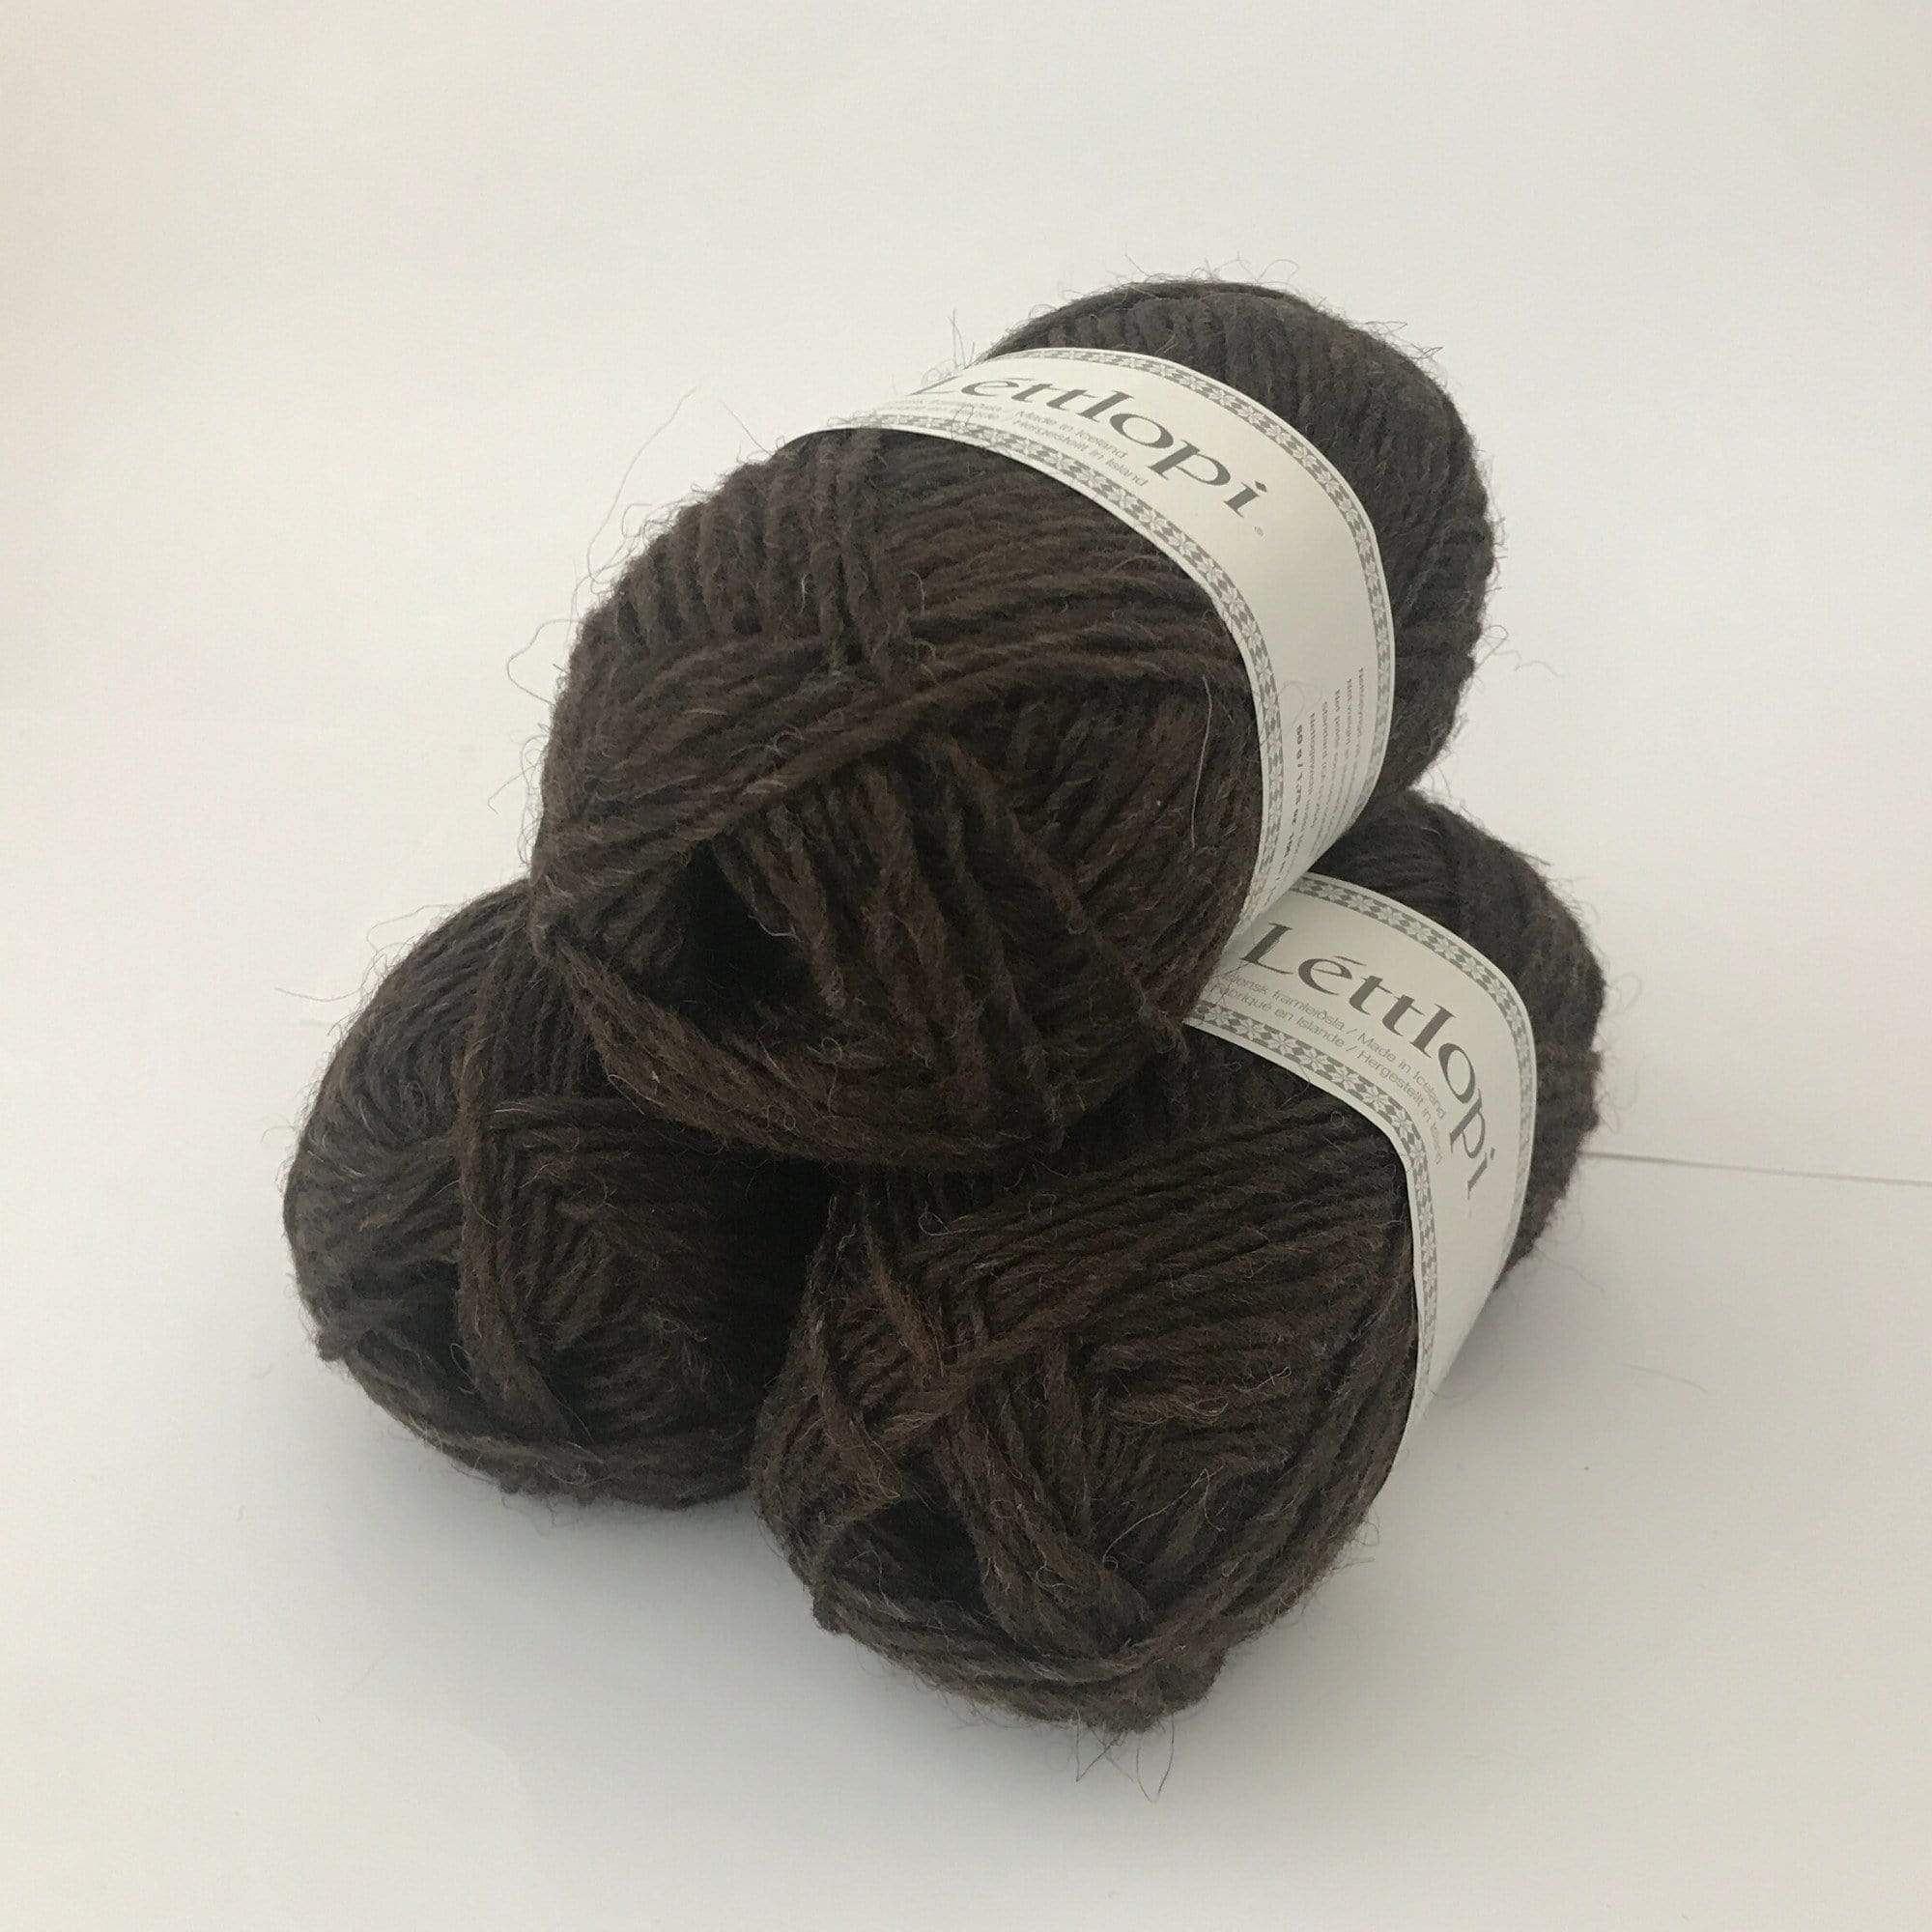 Ball of Lettlopi in colorway 00867 - chocolate heather.